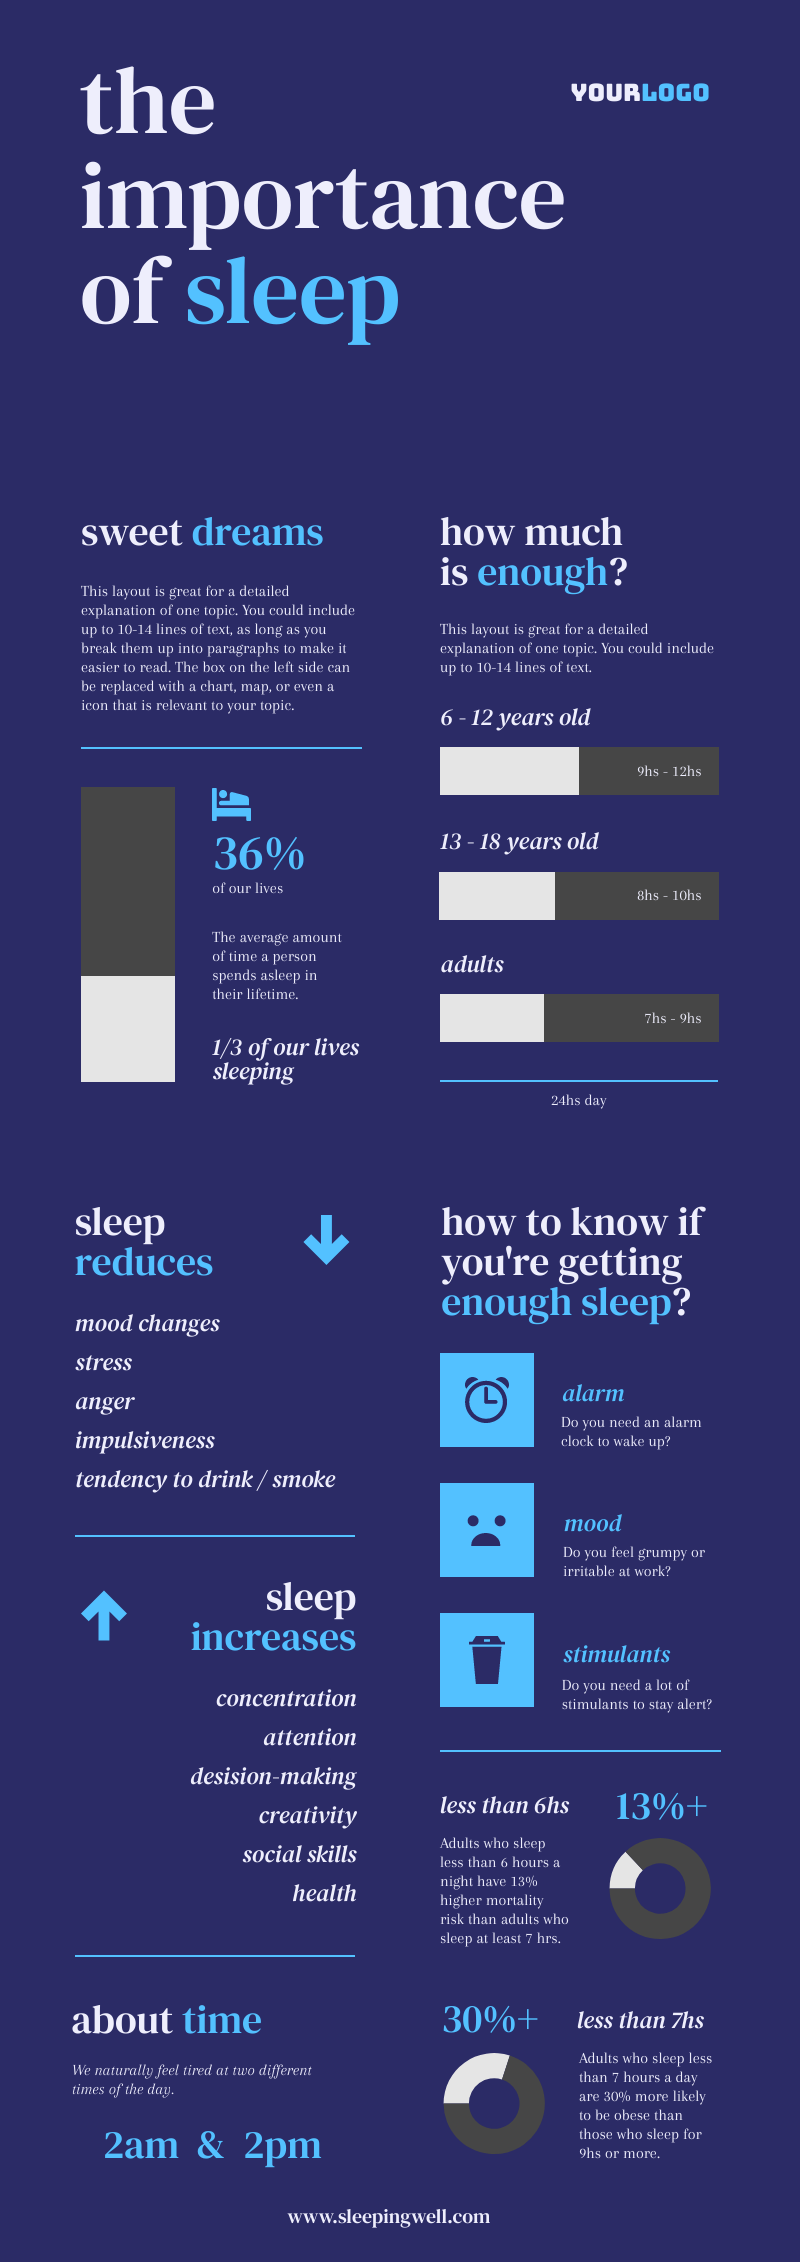 an infographic template showing data on the importance of sleep